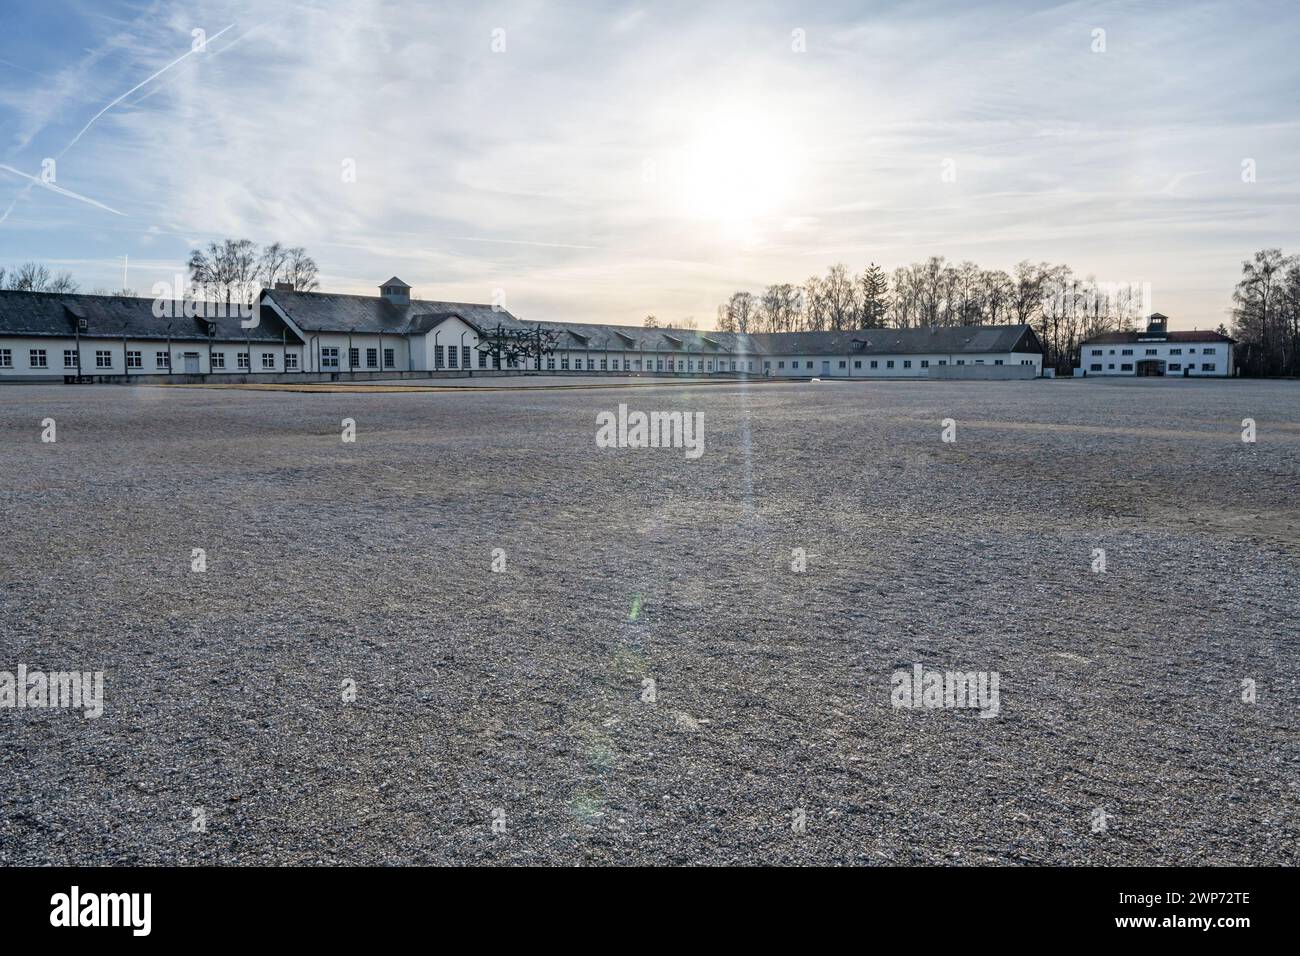 Dachau Concentration Camp Buildings in Germany. Stock Photo